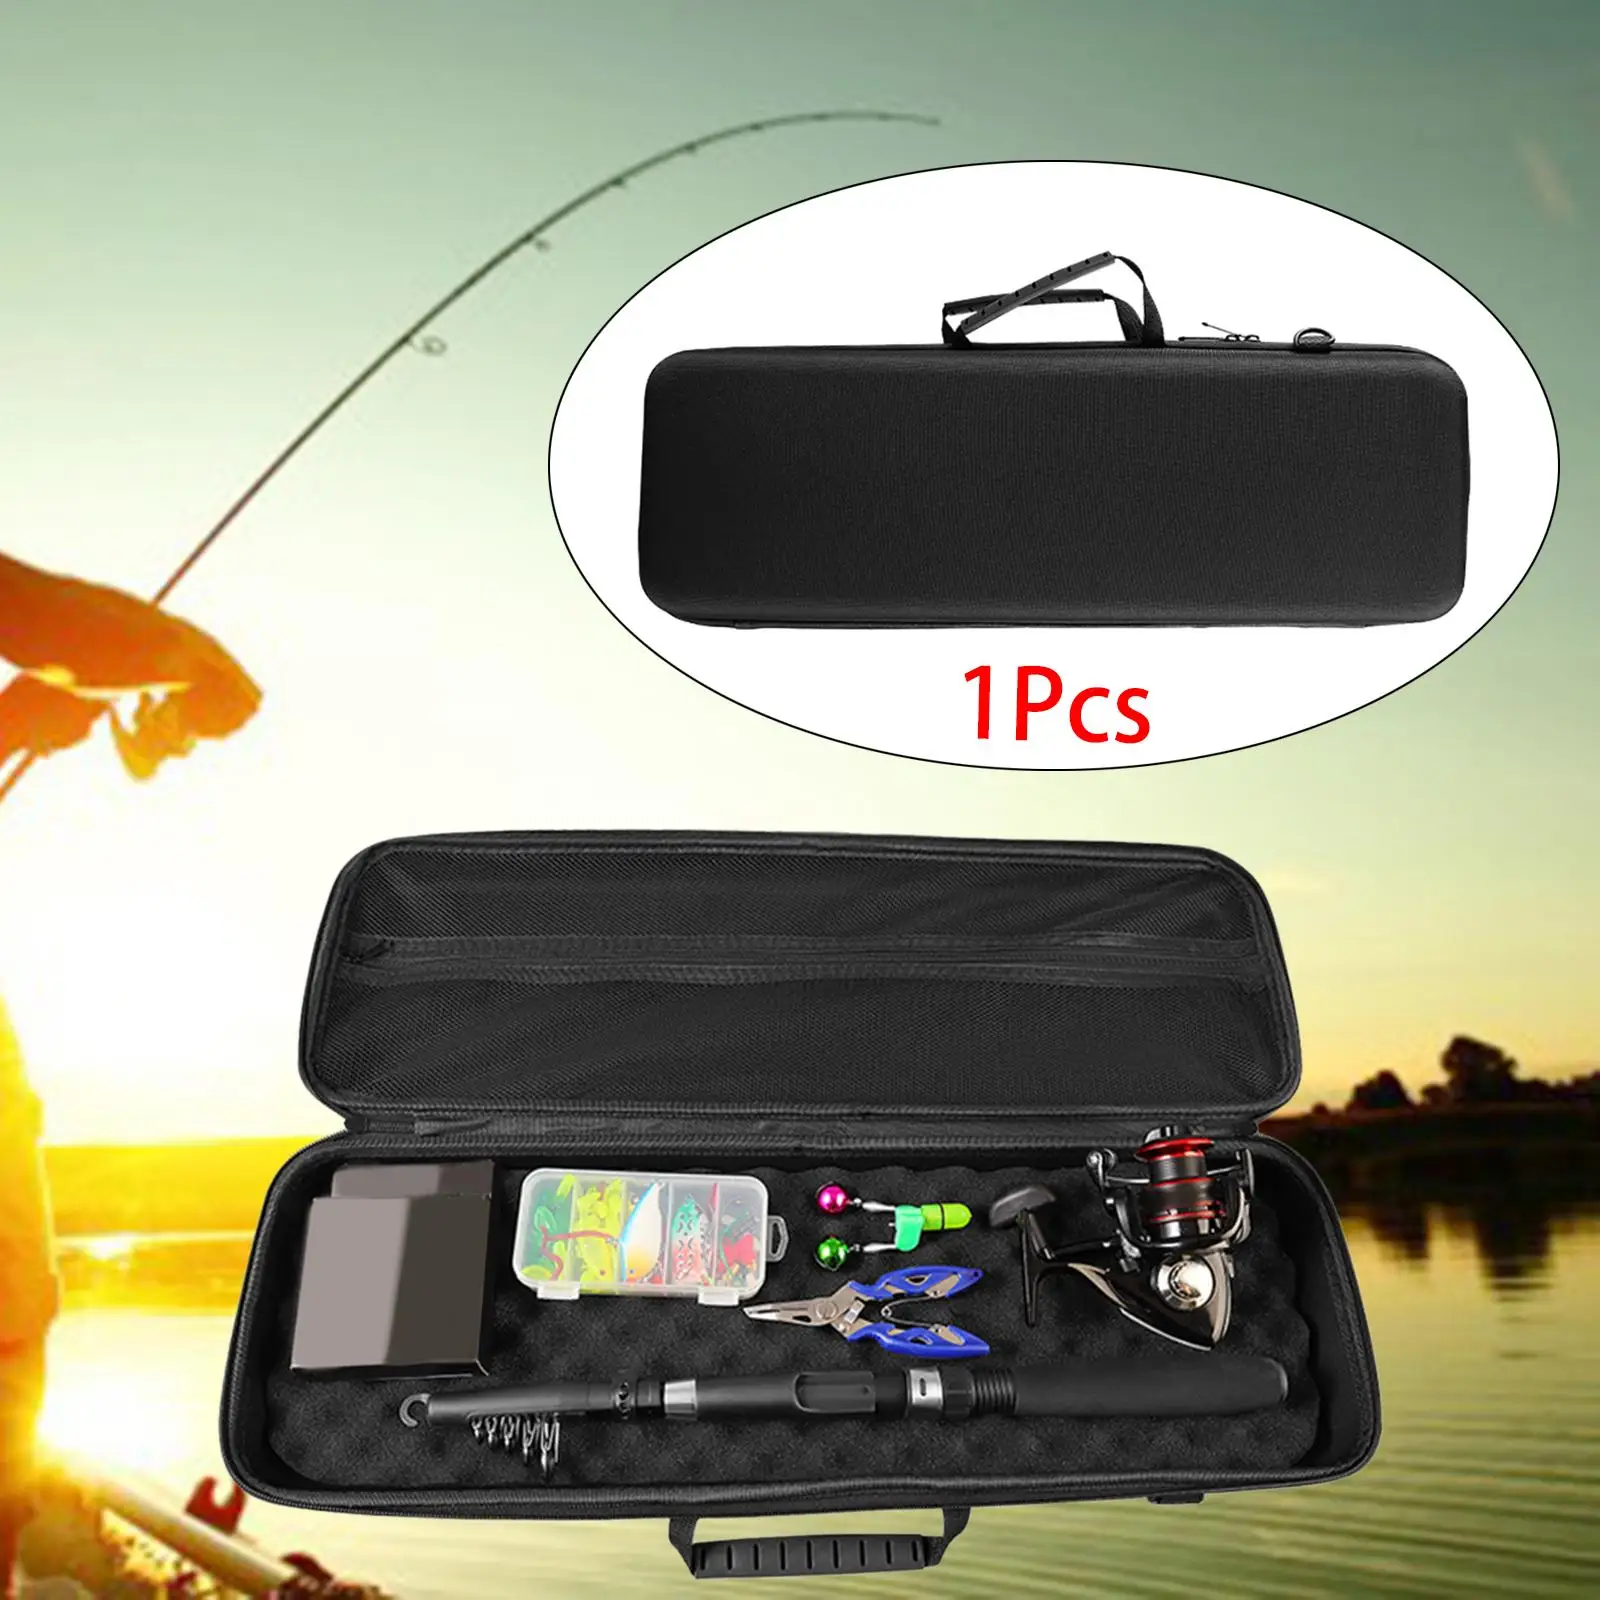 Fishing Rod Reel Bag Outdoor Fittings Sturdy Equipment Practical Lightweight Shockproof Travel Case Fishing Tackle Storage Case